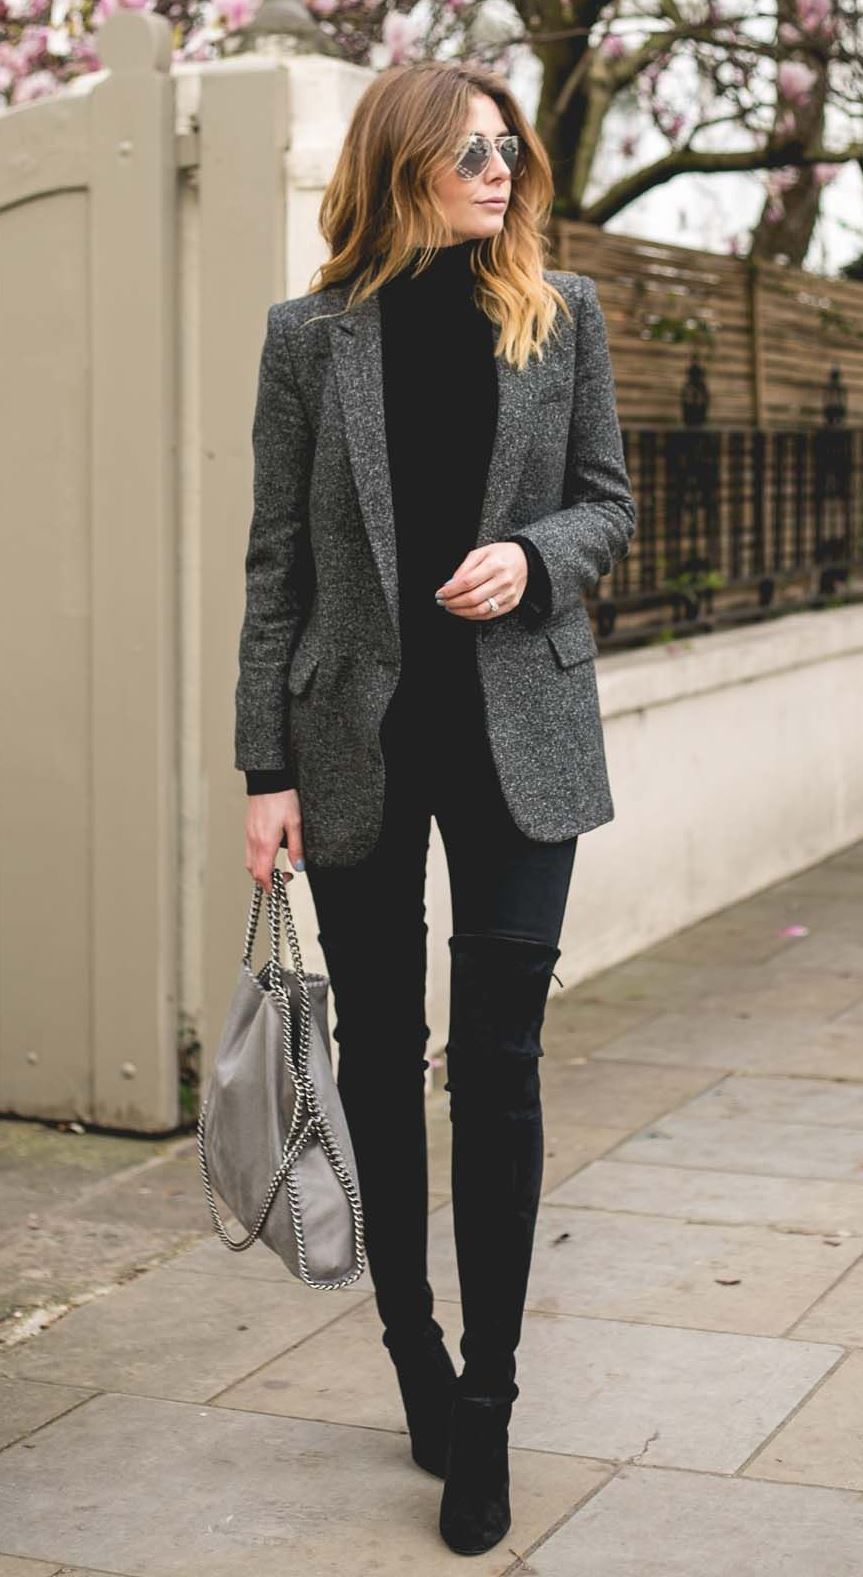 how to style a blazer : top + skinnies + bag + over knee boots